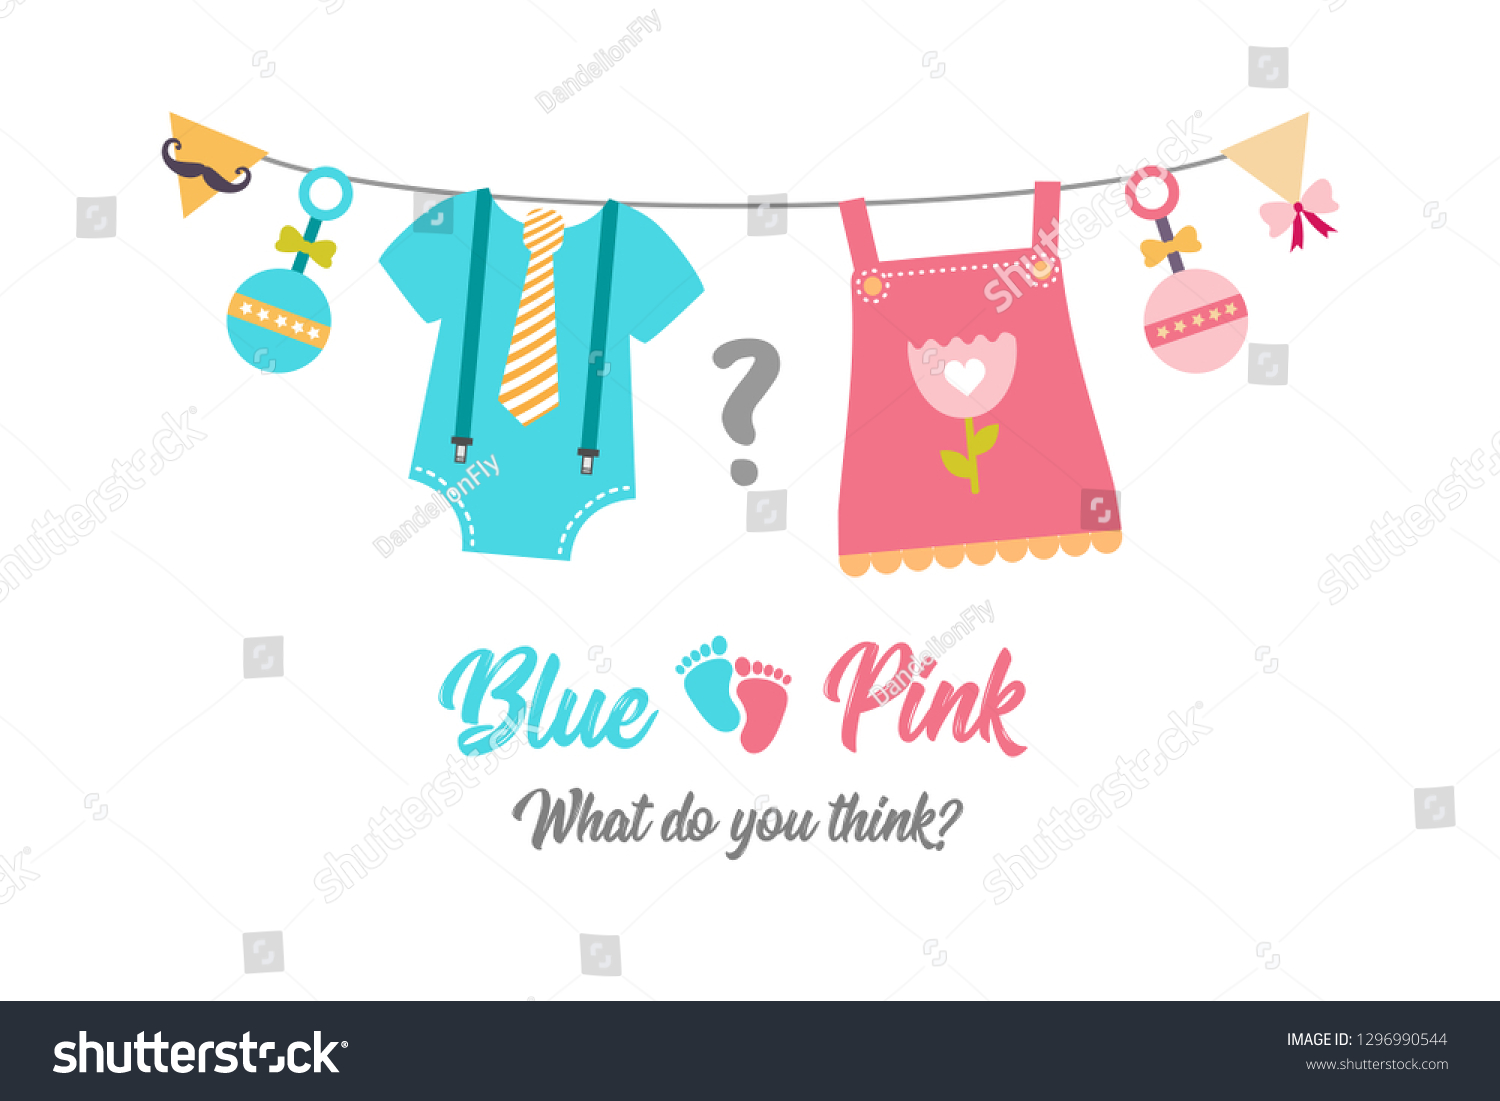 New Boy or Girl Gender Reveal Party Photo Background Unisex Baby Shower Pink or Blue Blackboard Shiny Colorful Bulbs Decoration Photography Backdrops Banner for Dessert Table Supplies 7x5ft